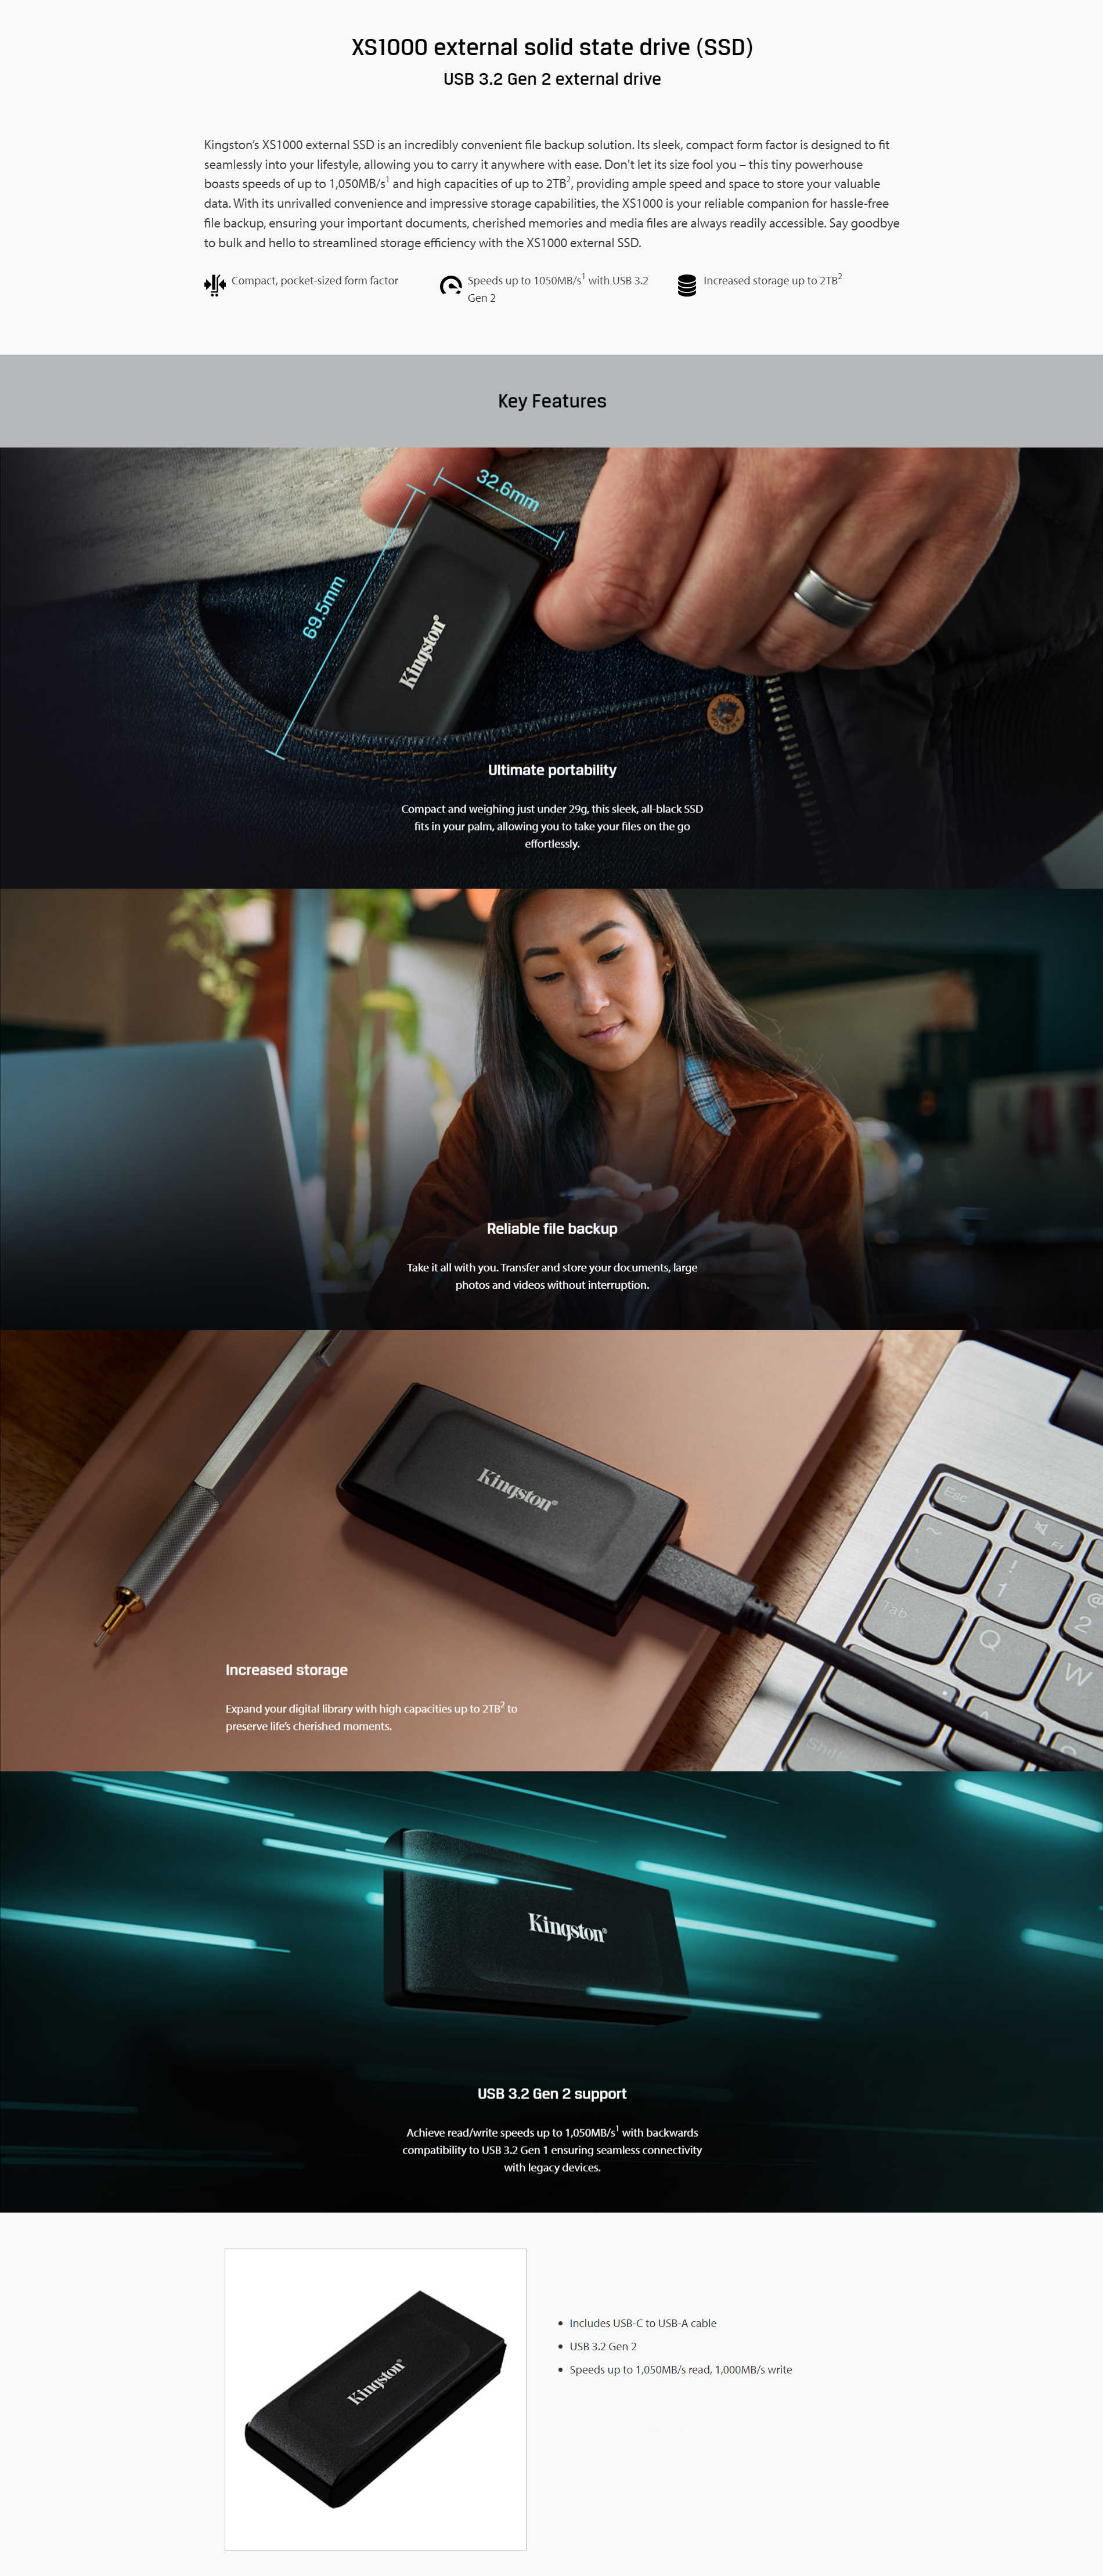 A large marketing image providing additional information about the product Kingston XS1000 USB 3.2 Gen 2 Type-C Portable External SSD - 1TB - Additional alt info not provided